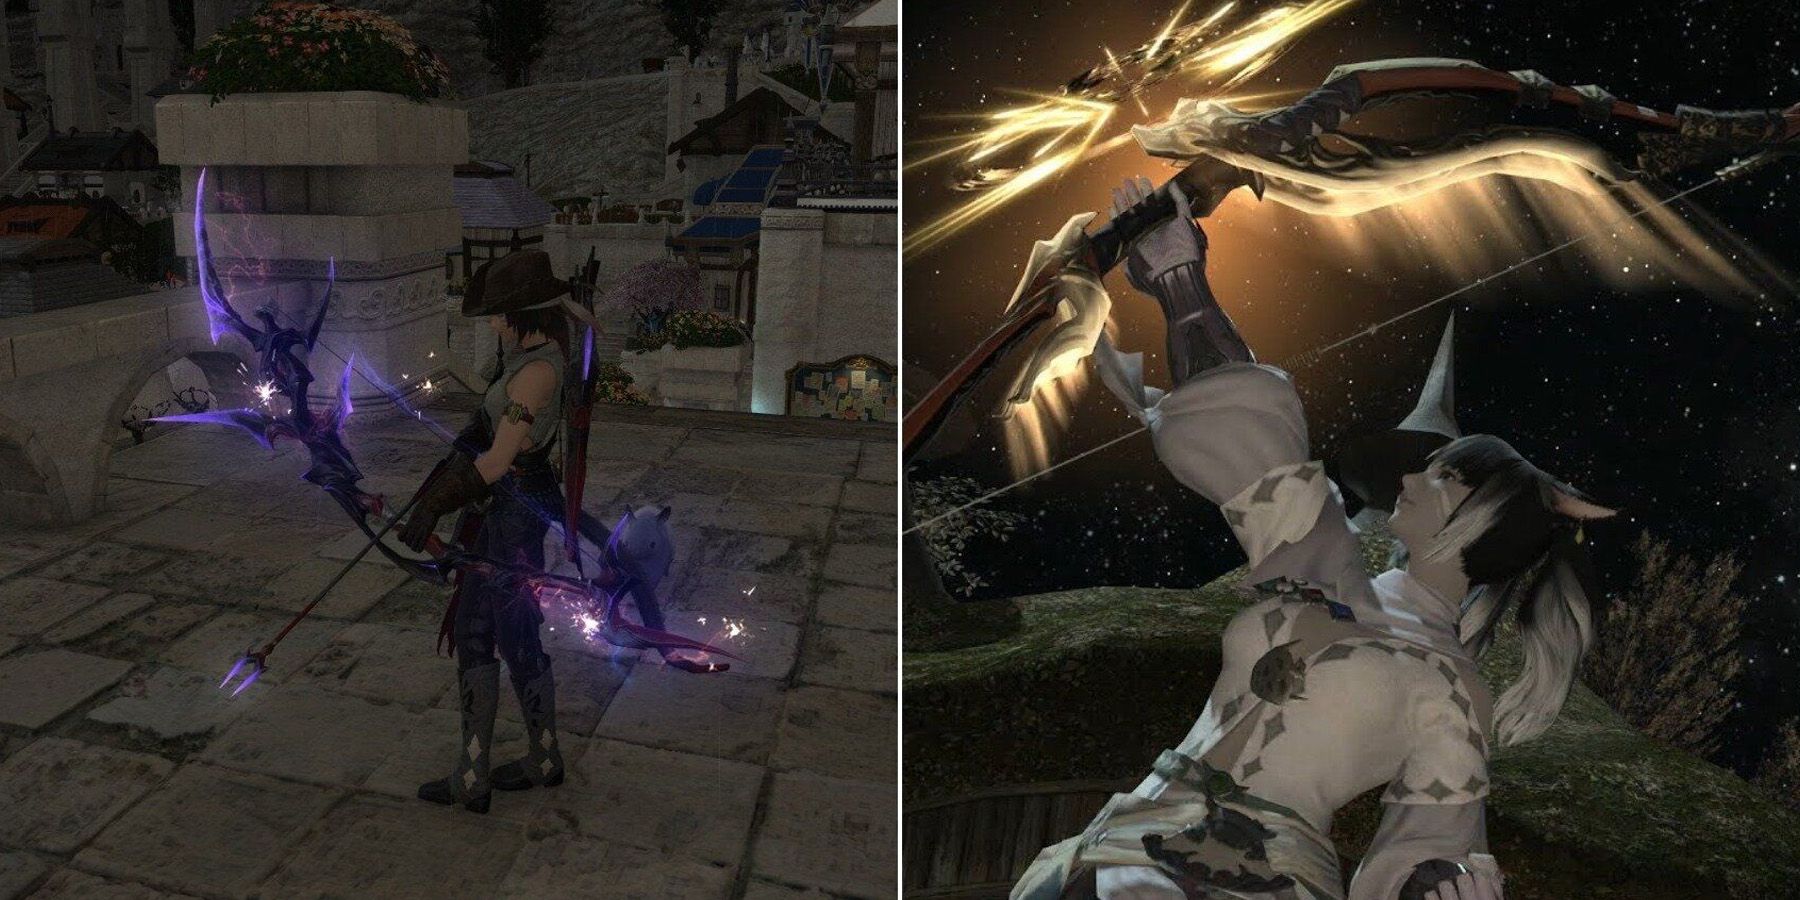 FF14 image of ramuh bow and character holding up zodiac bow